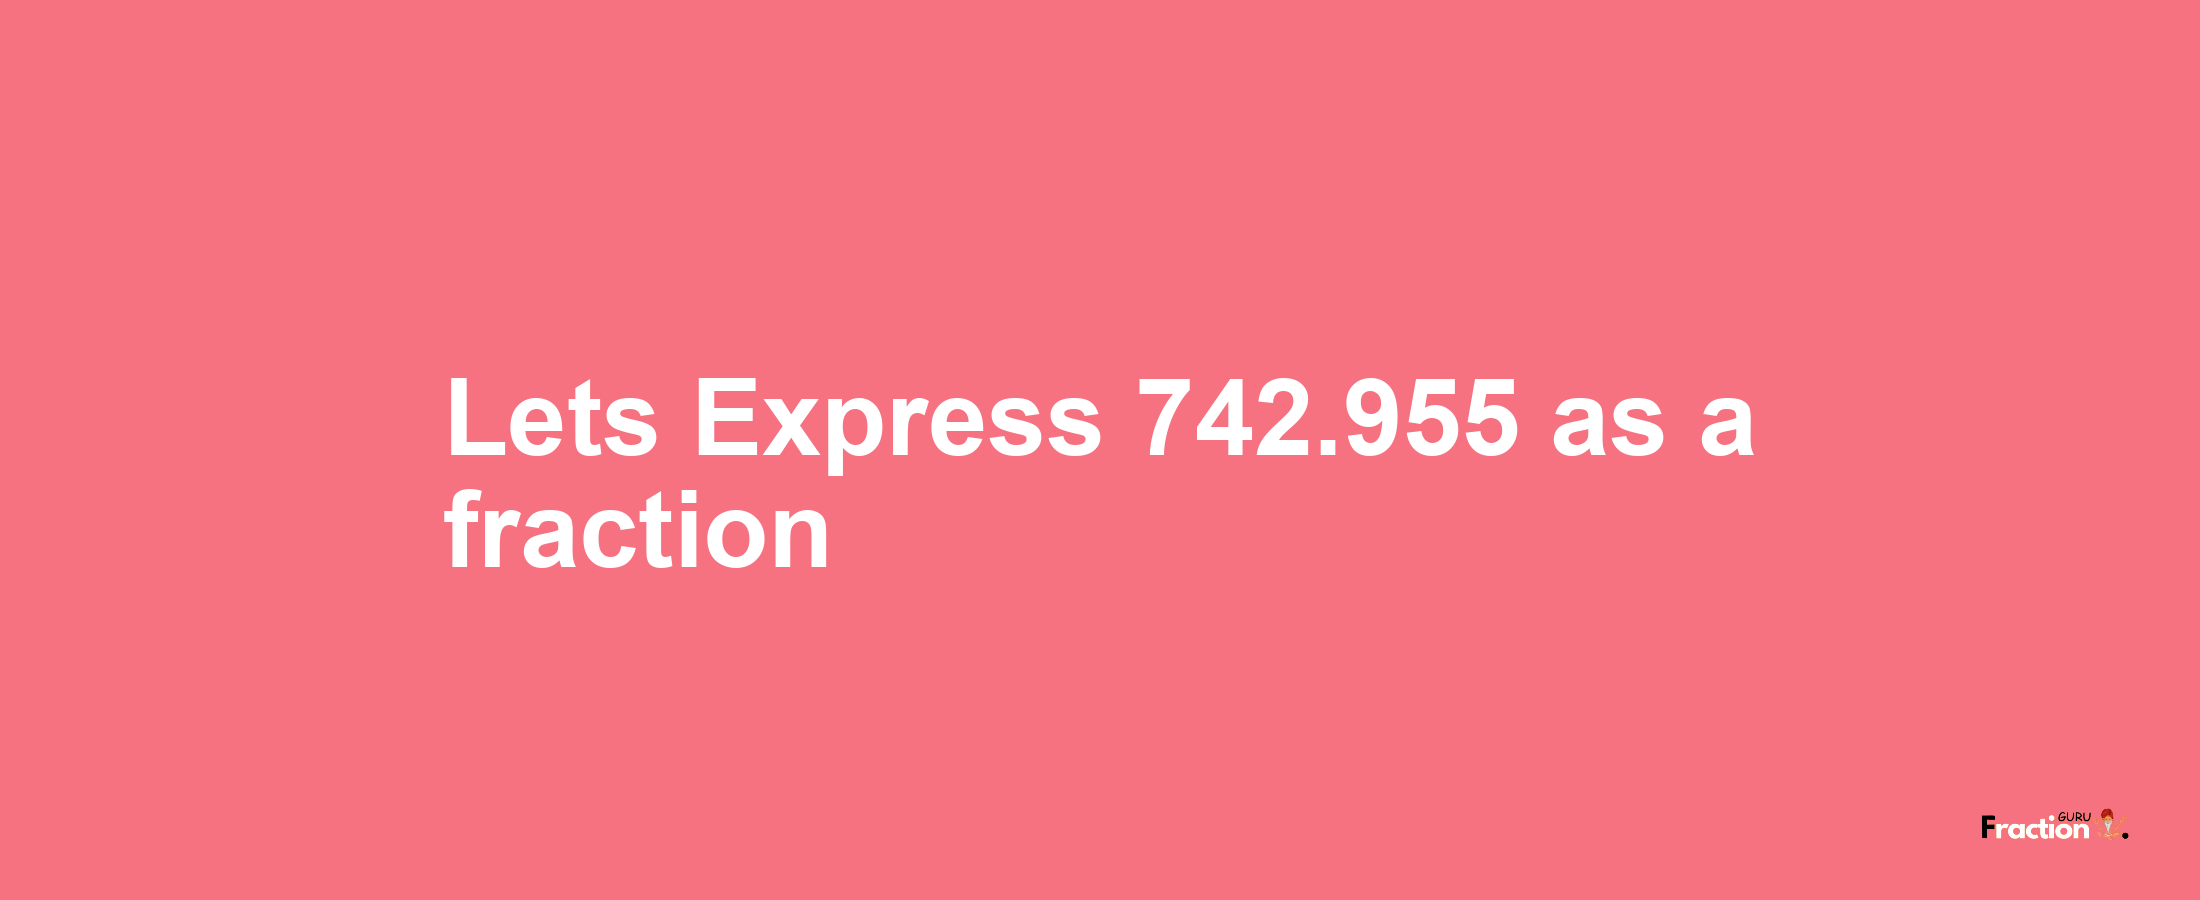 Lets Express 742.955 as afraction